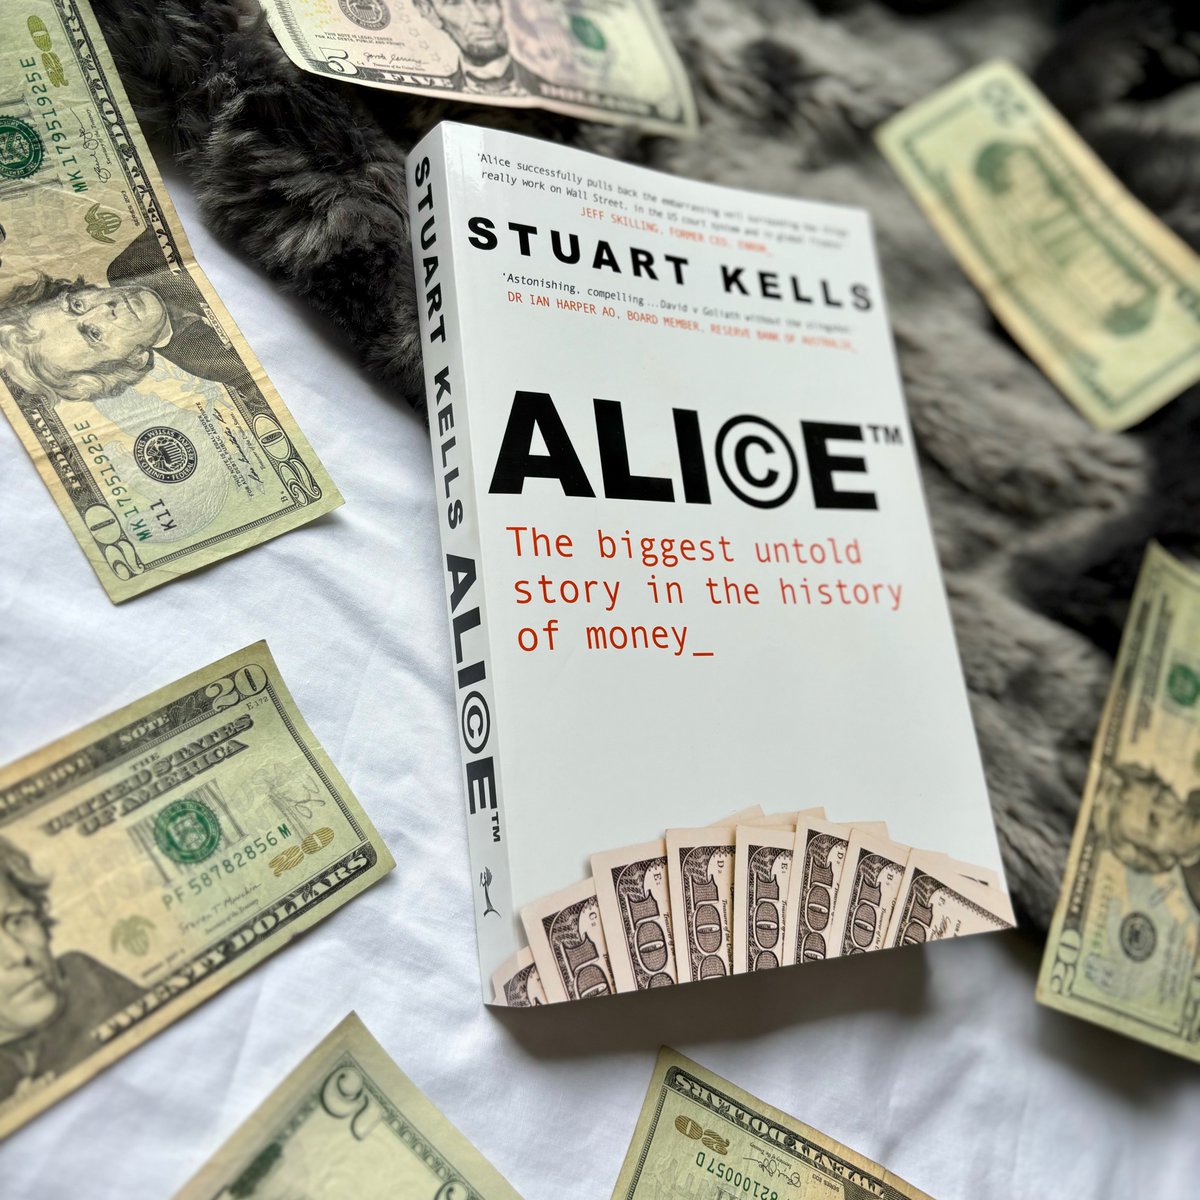 Uncover the biggest untold story in the history of money. Buy Alice™️ by @StuartKells now, found at all good bookstores and online.